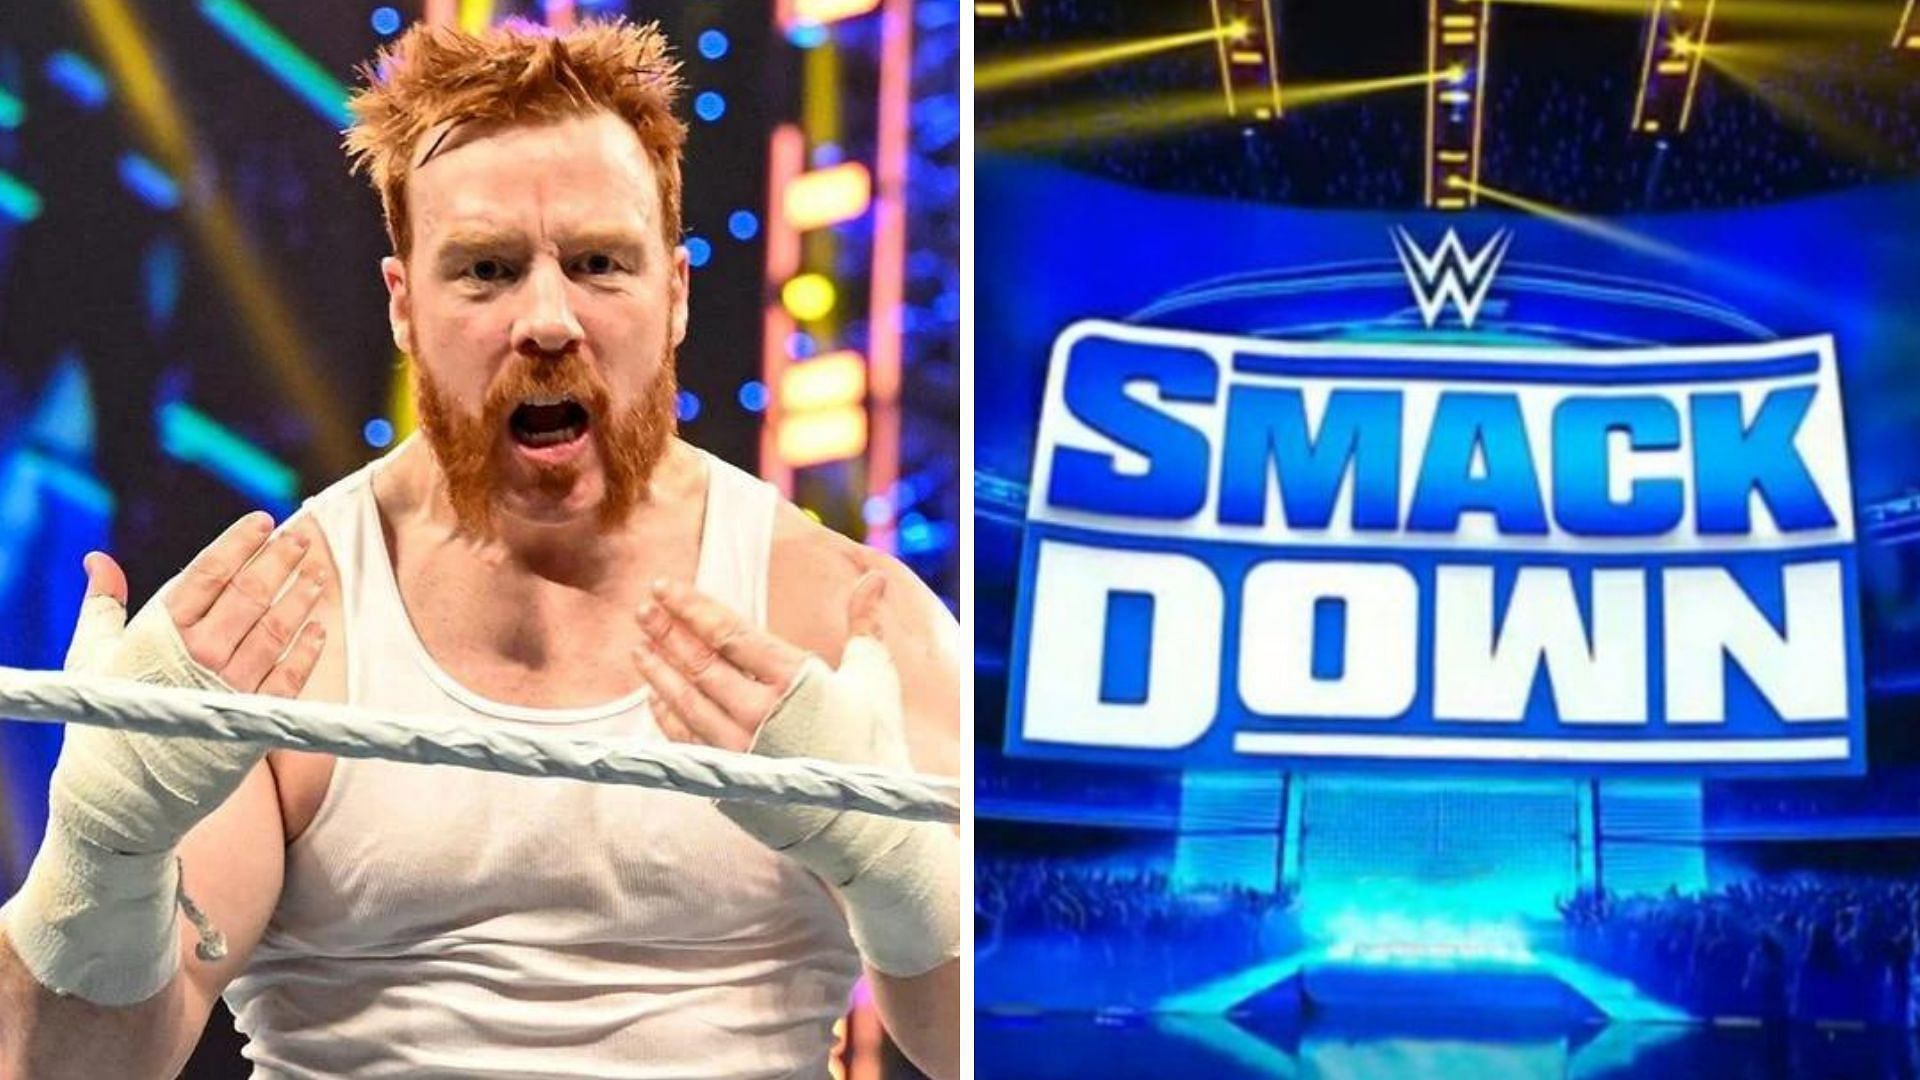 Sheamus sends message to WWE Universe ahead of big match tonight on SmackDown